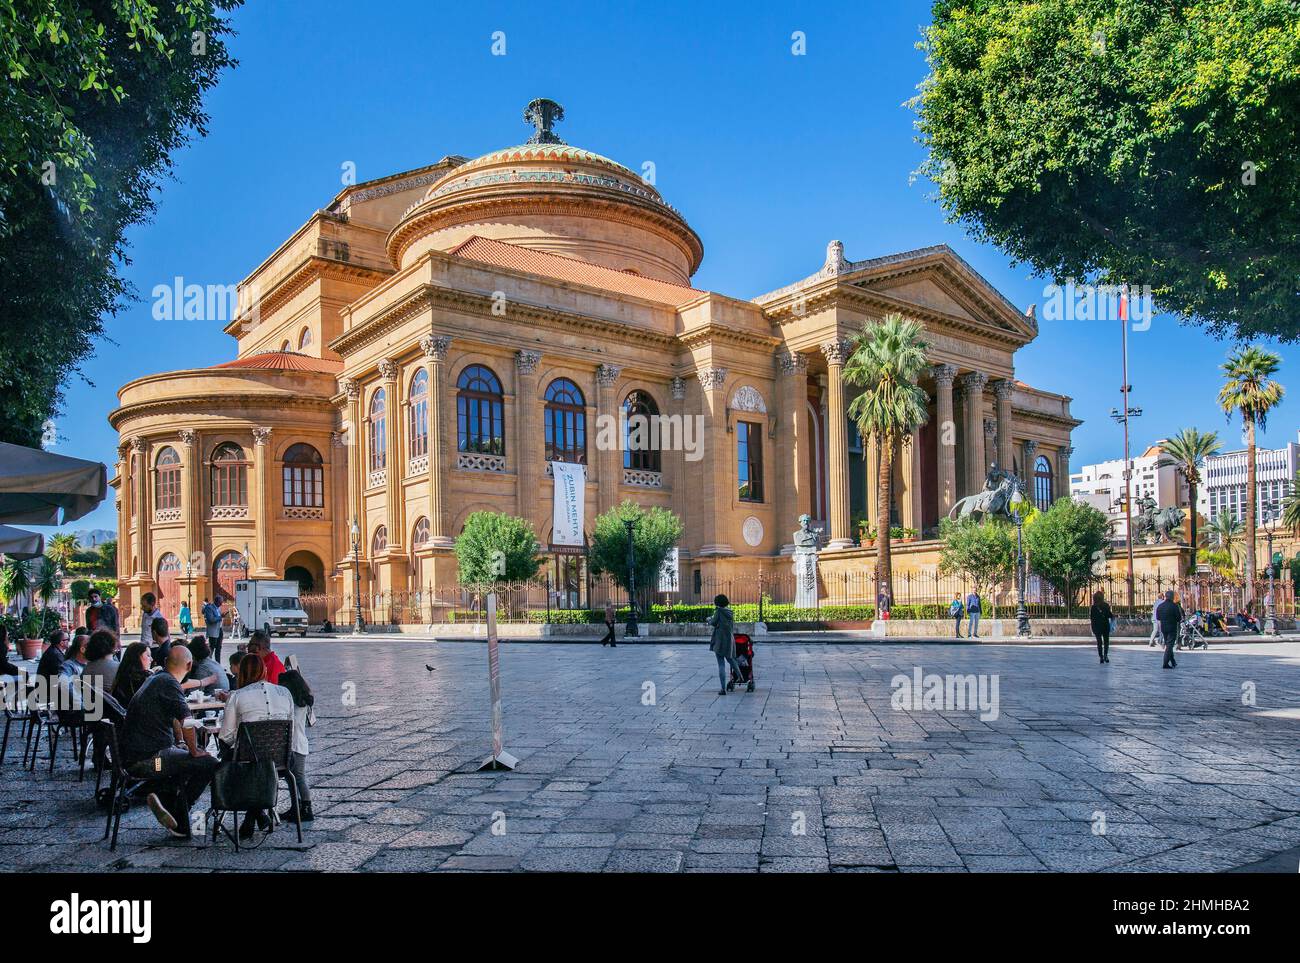 Opera house Teatro Massimo in the old town, Palermo, Sicily, Italy Stock Photo